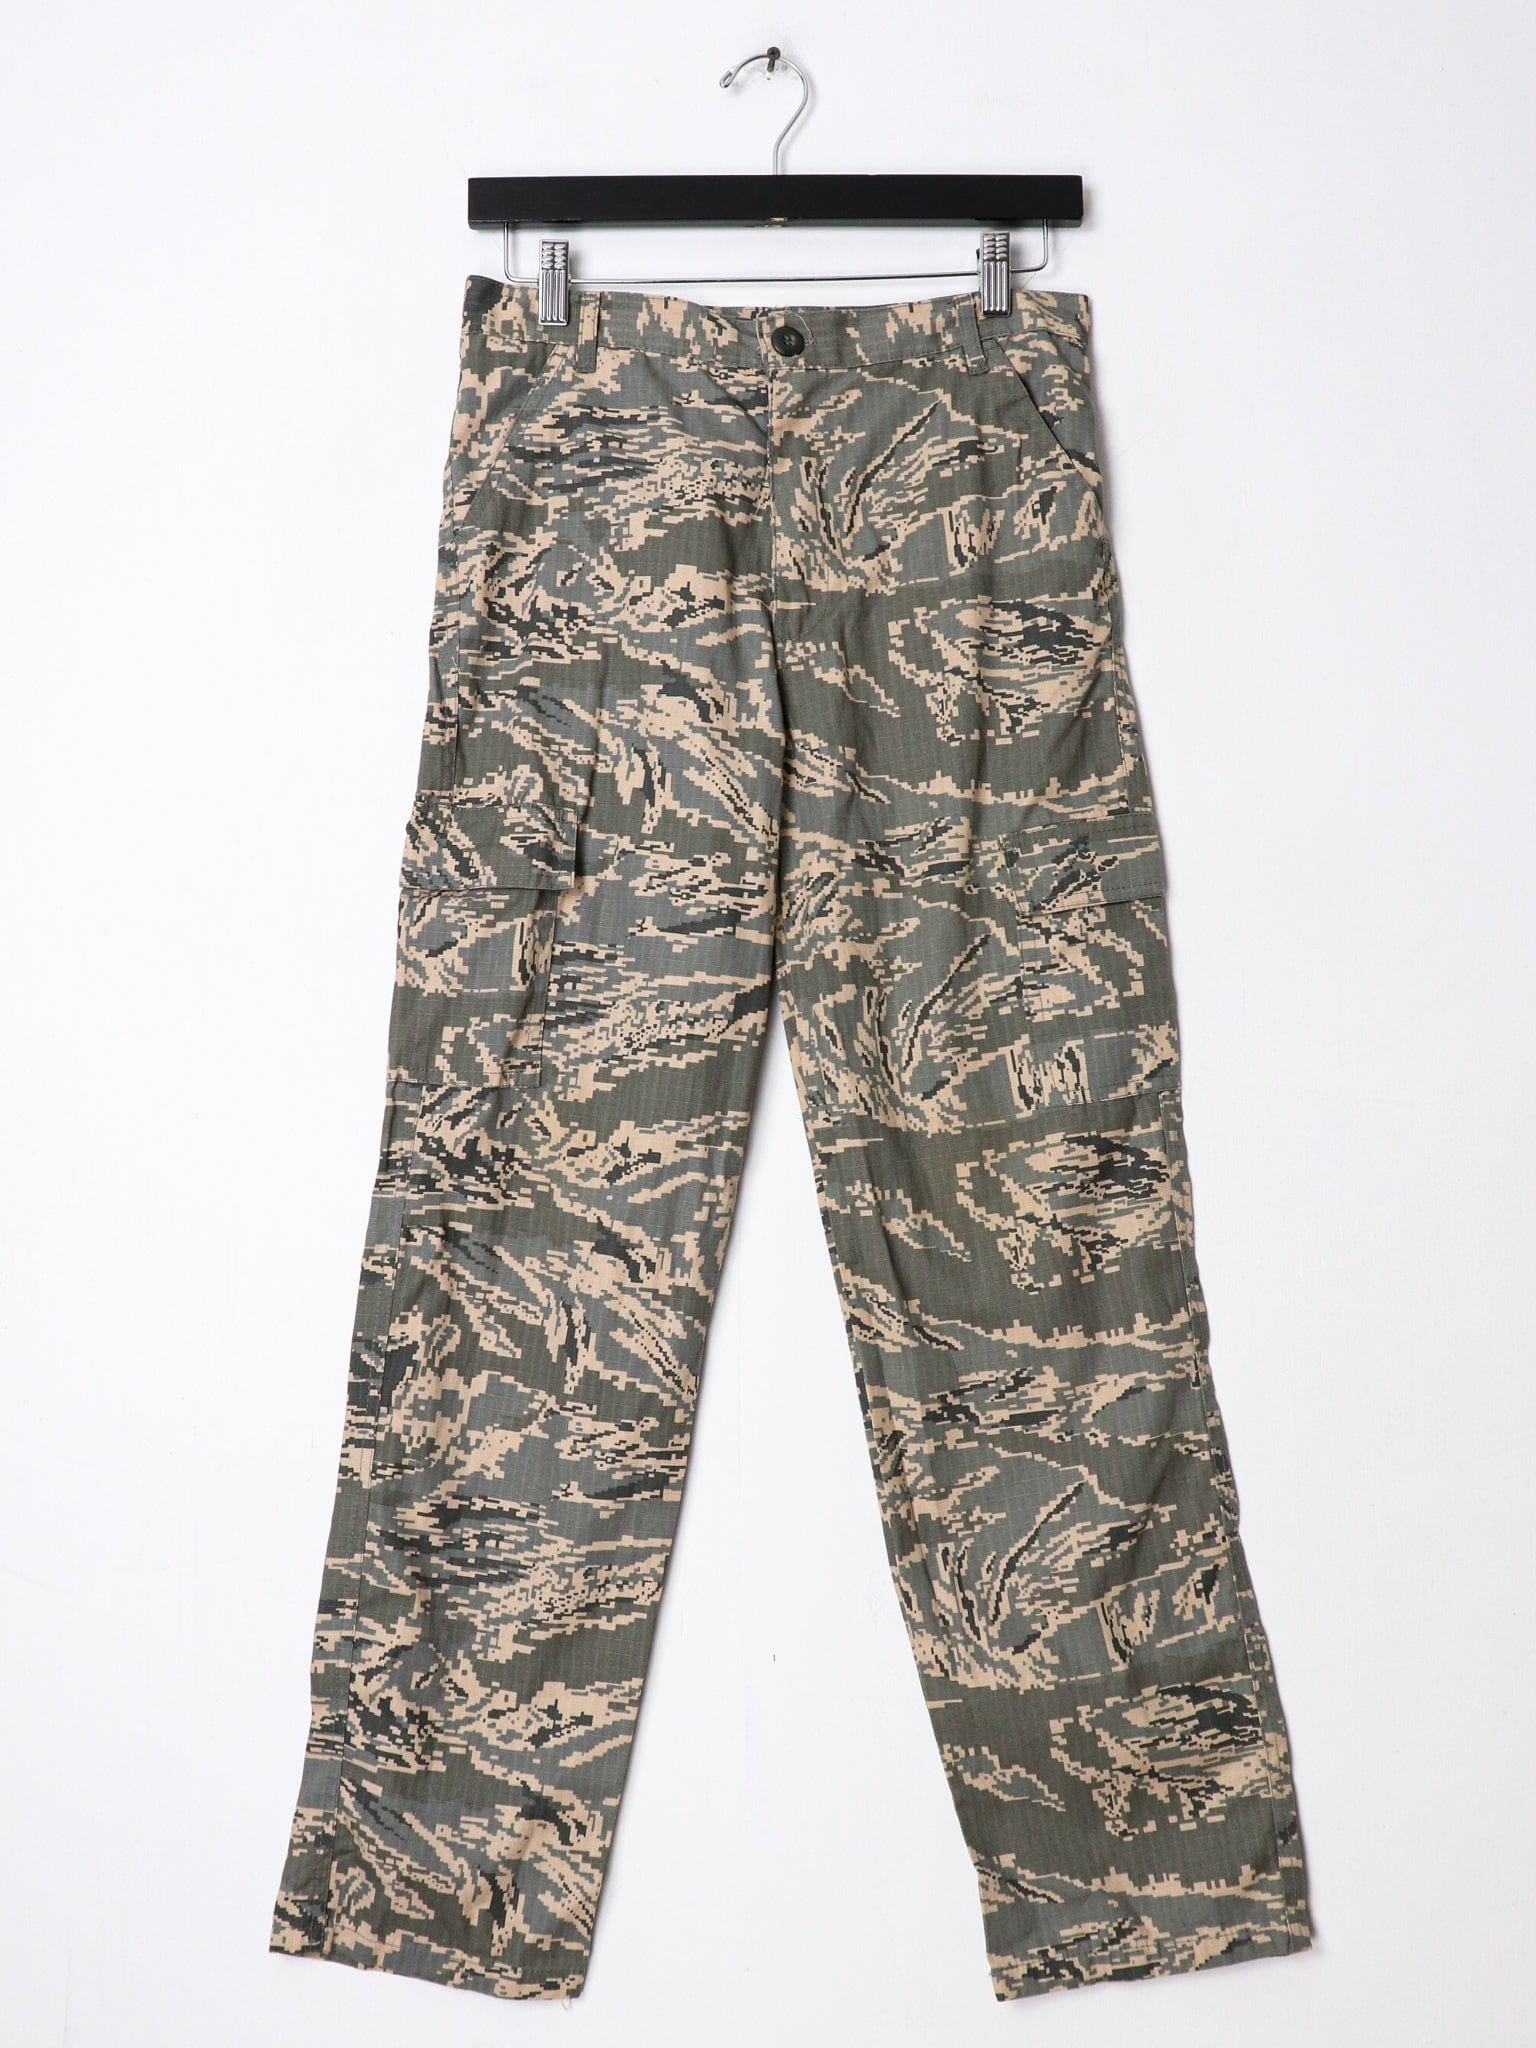 Other Pants Digi Camo Cargo Pants Youth Size Large